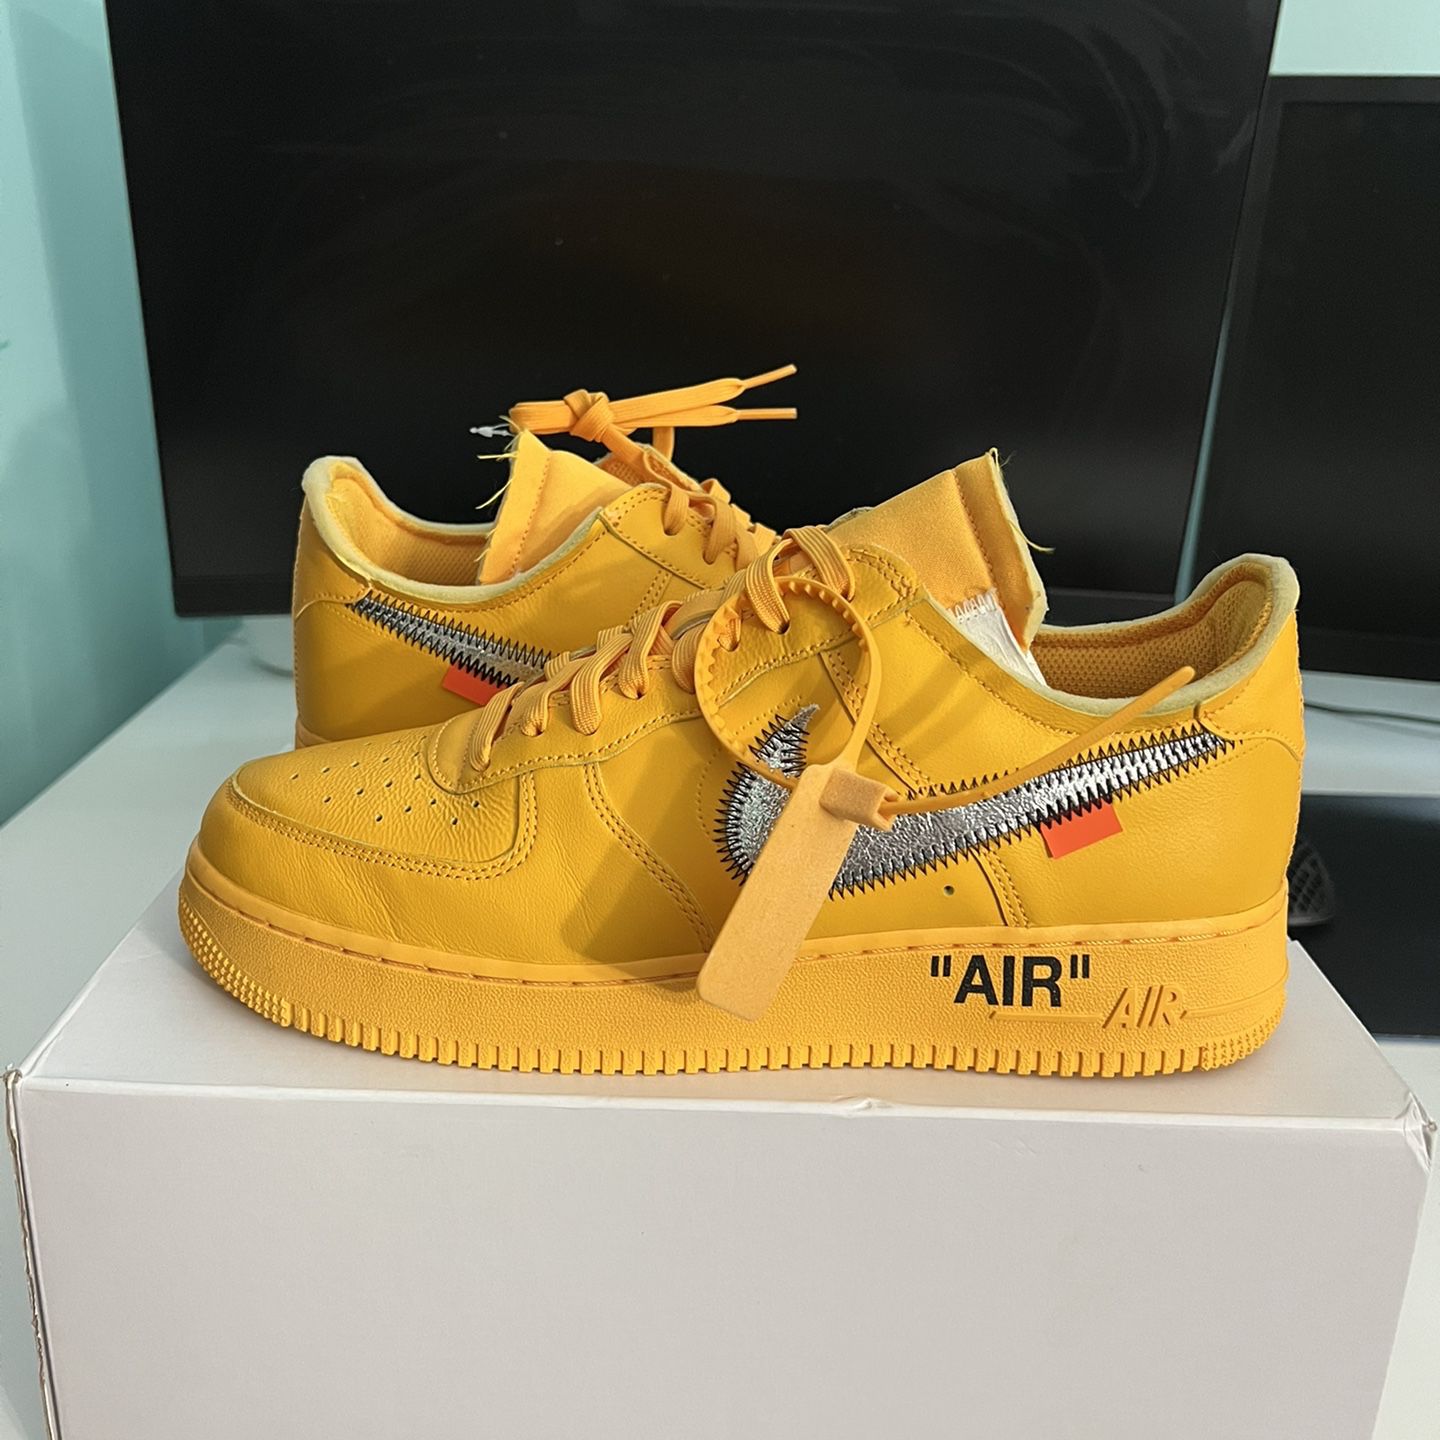 NIKE AIR FORCE 1 x OFF-WHITE ICA UNIVERSITY GOLD - Prime Reps